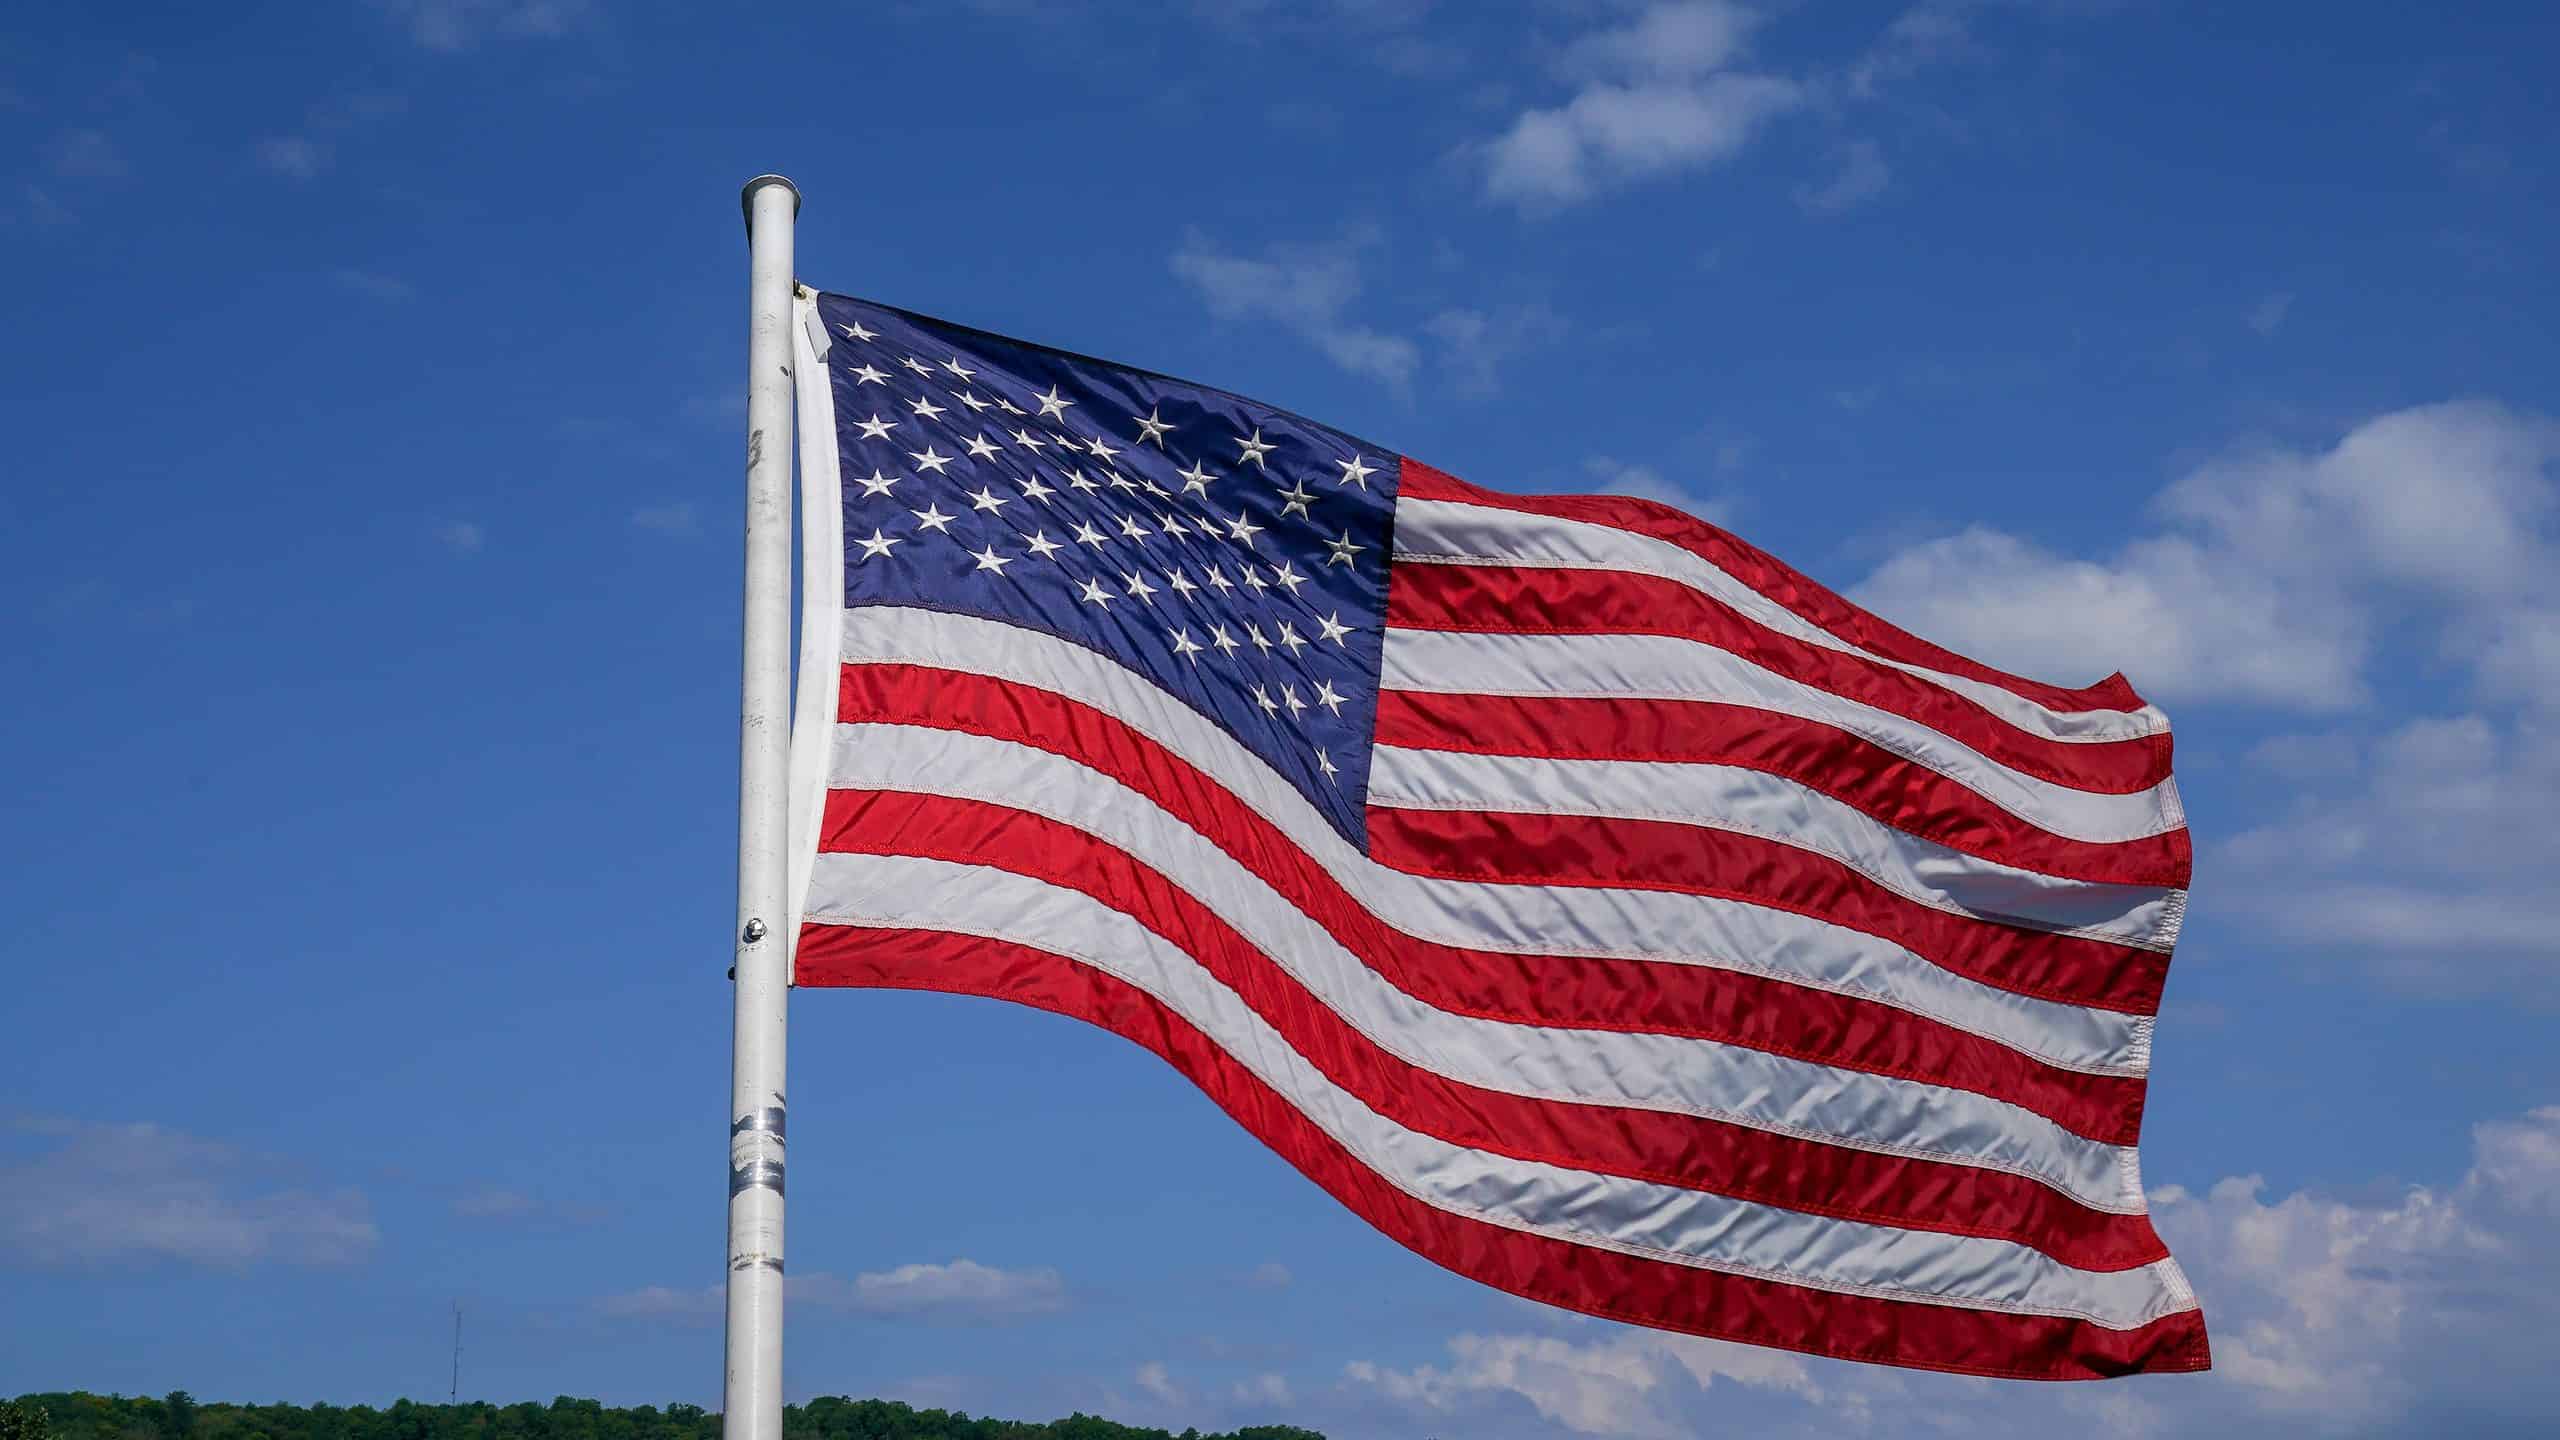 Flag of the United States of America (American flag) blowing in the wind